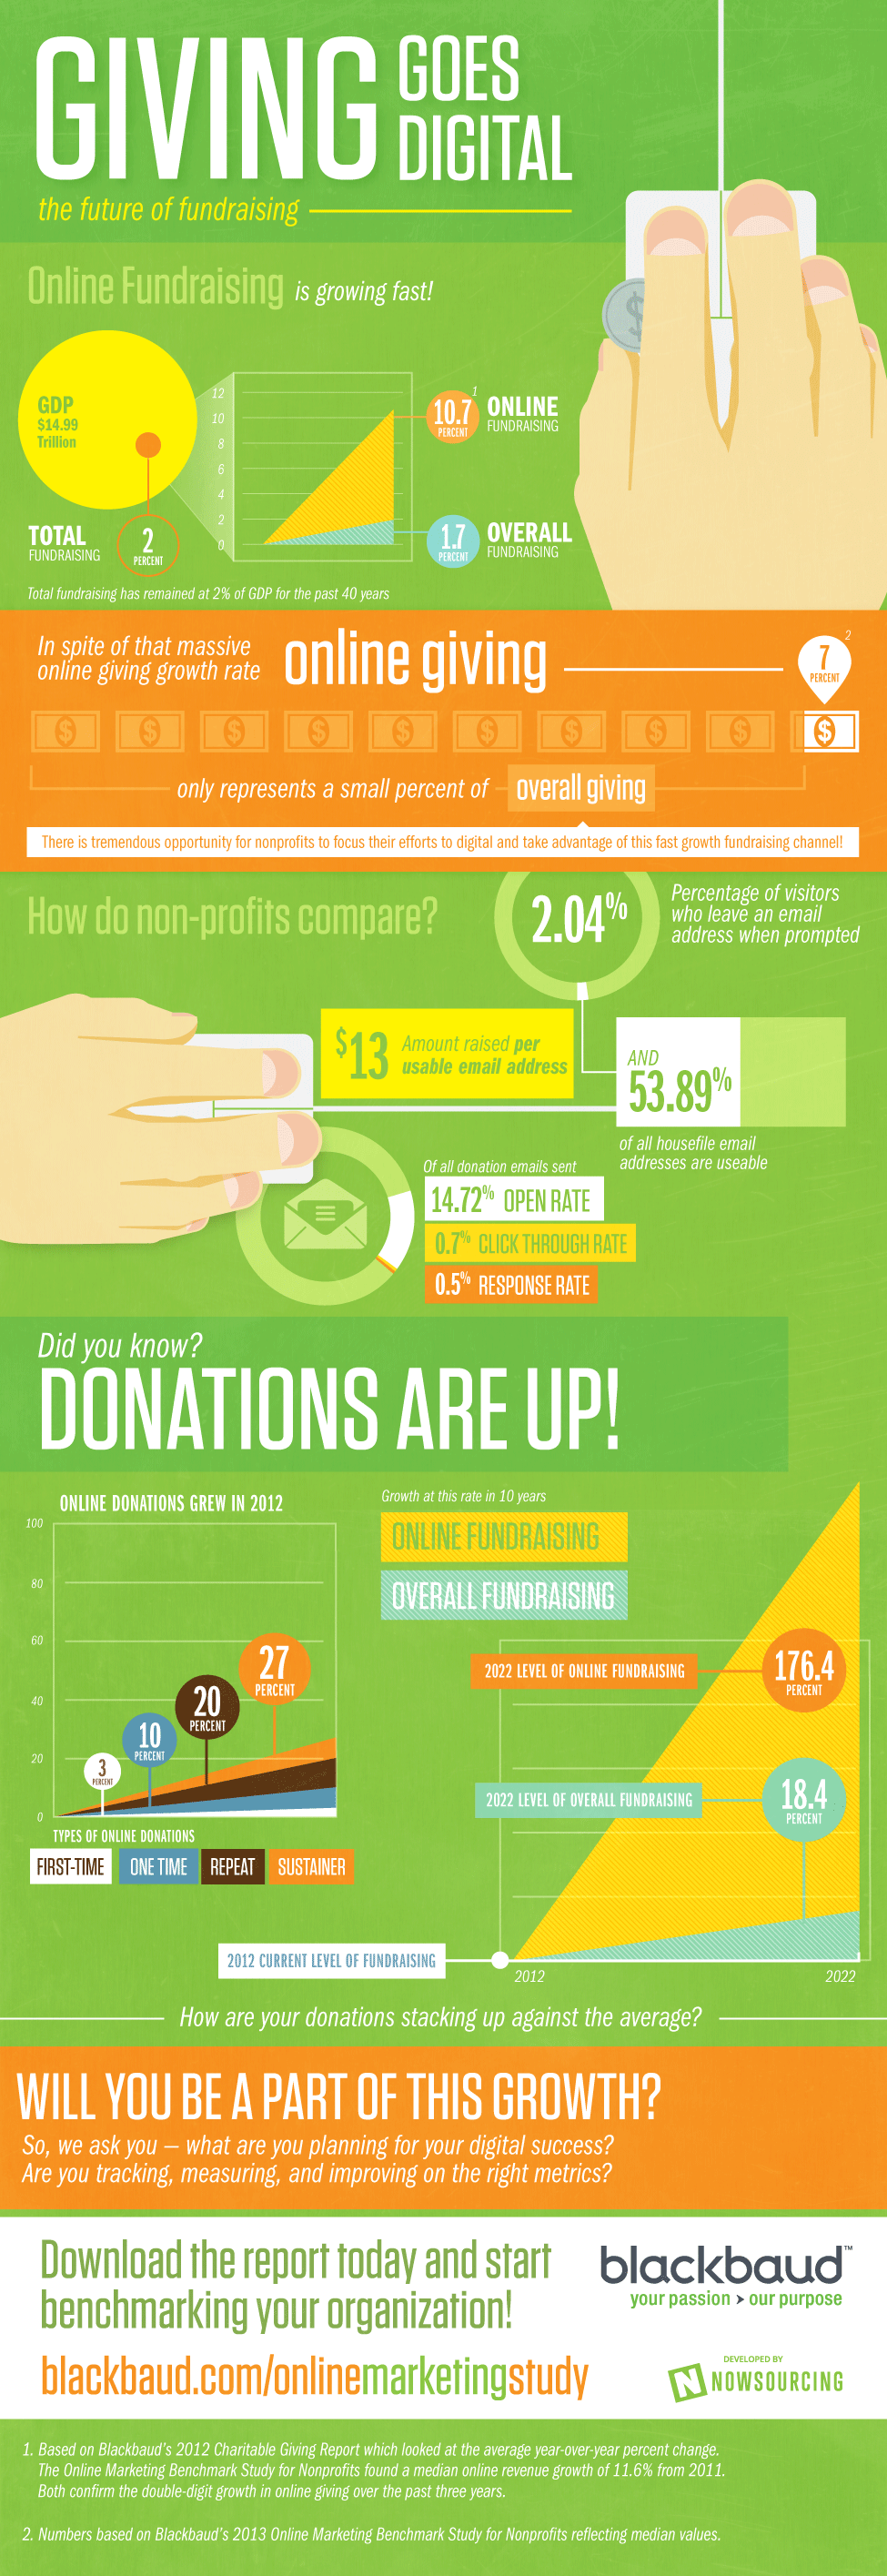 Giving Goes Digital: The Future of Fundraising